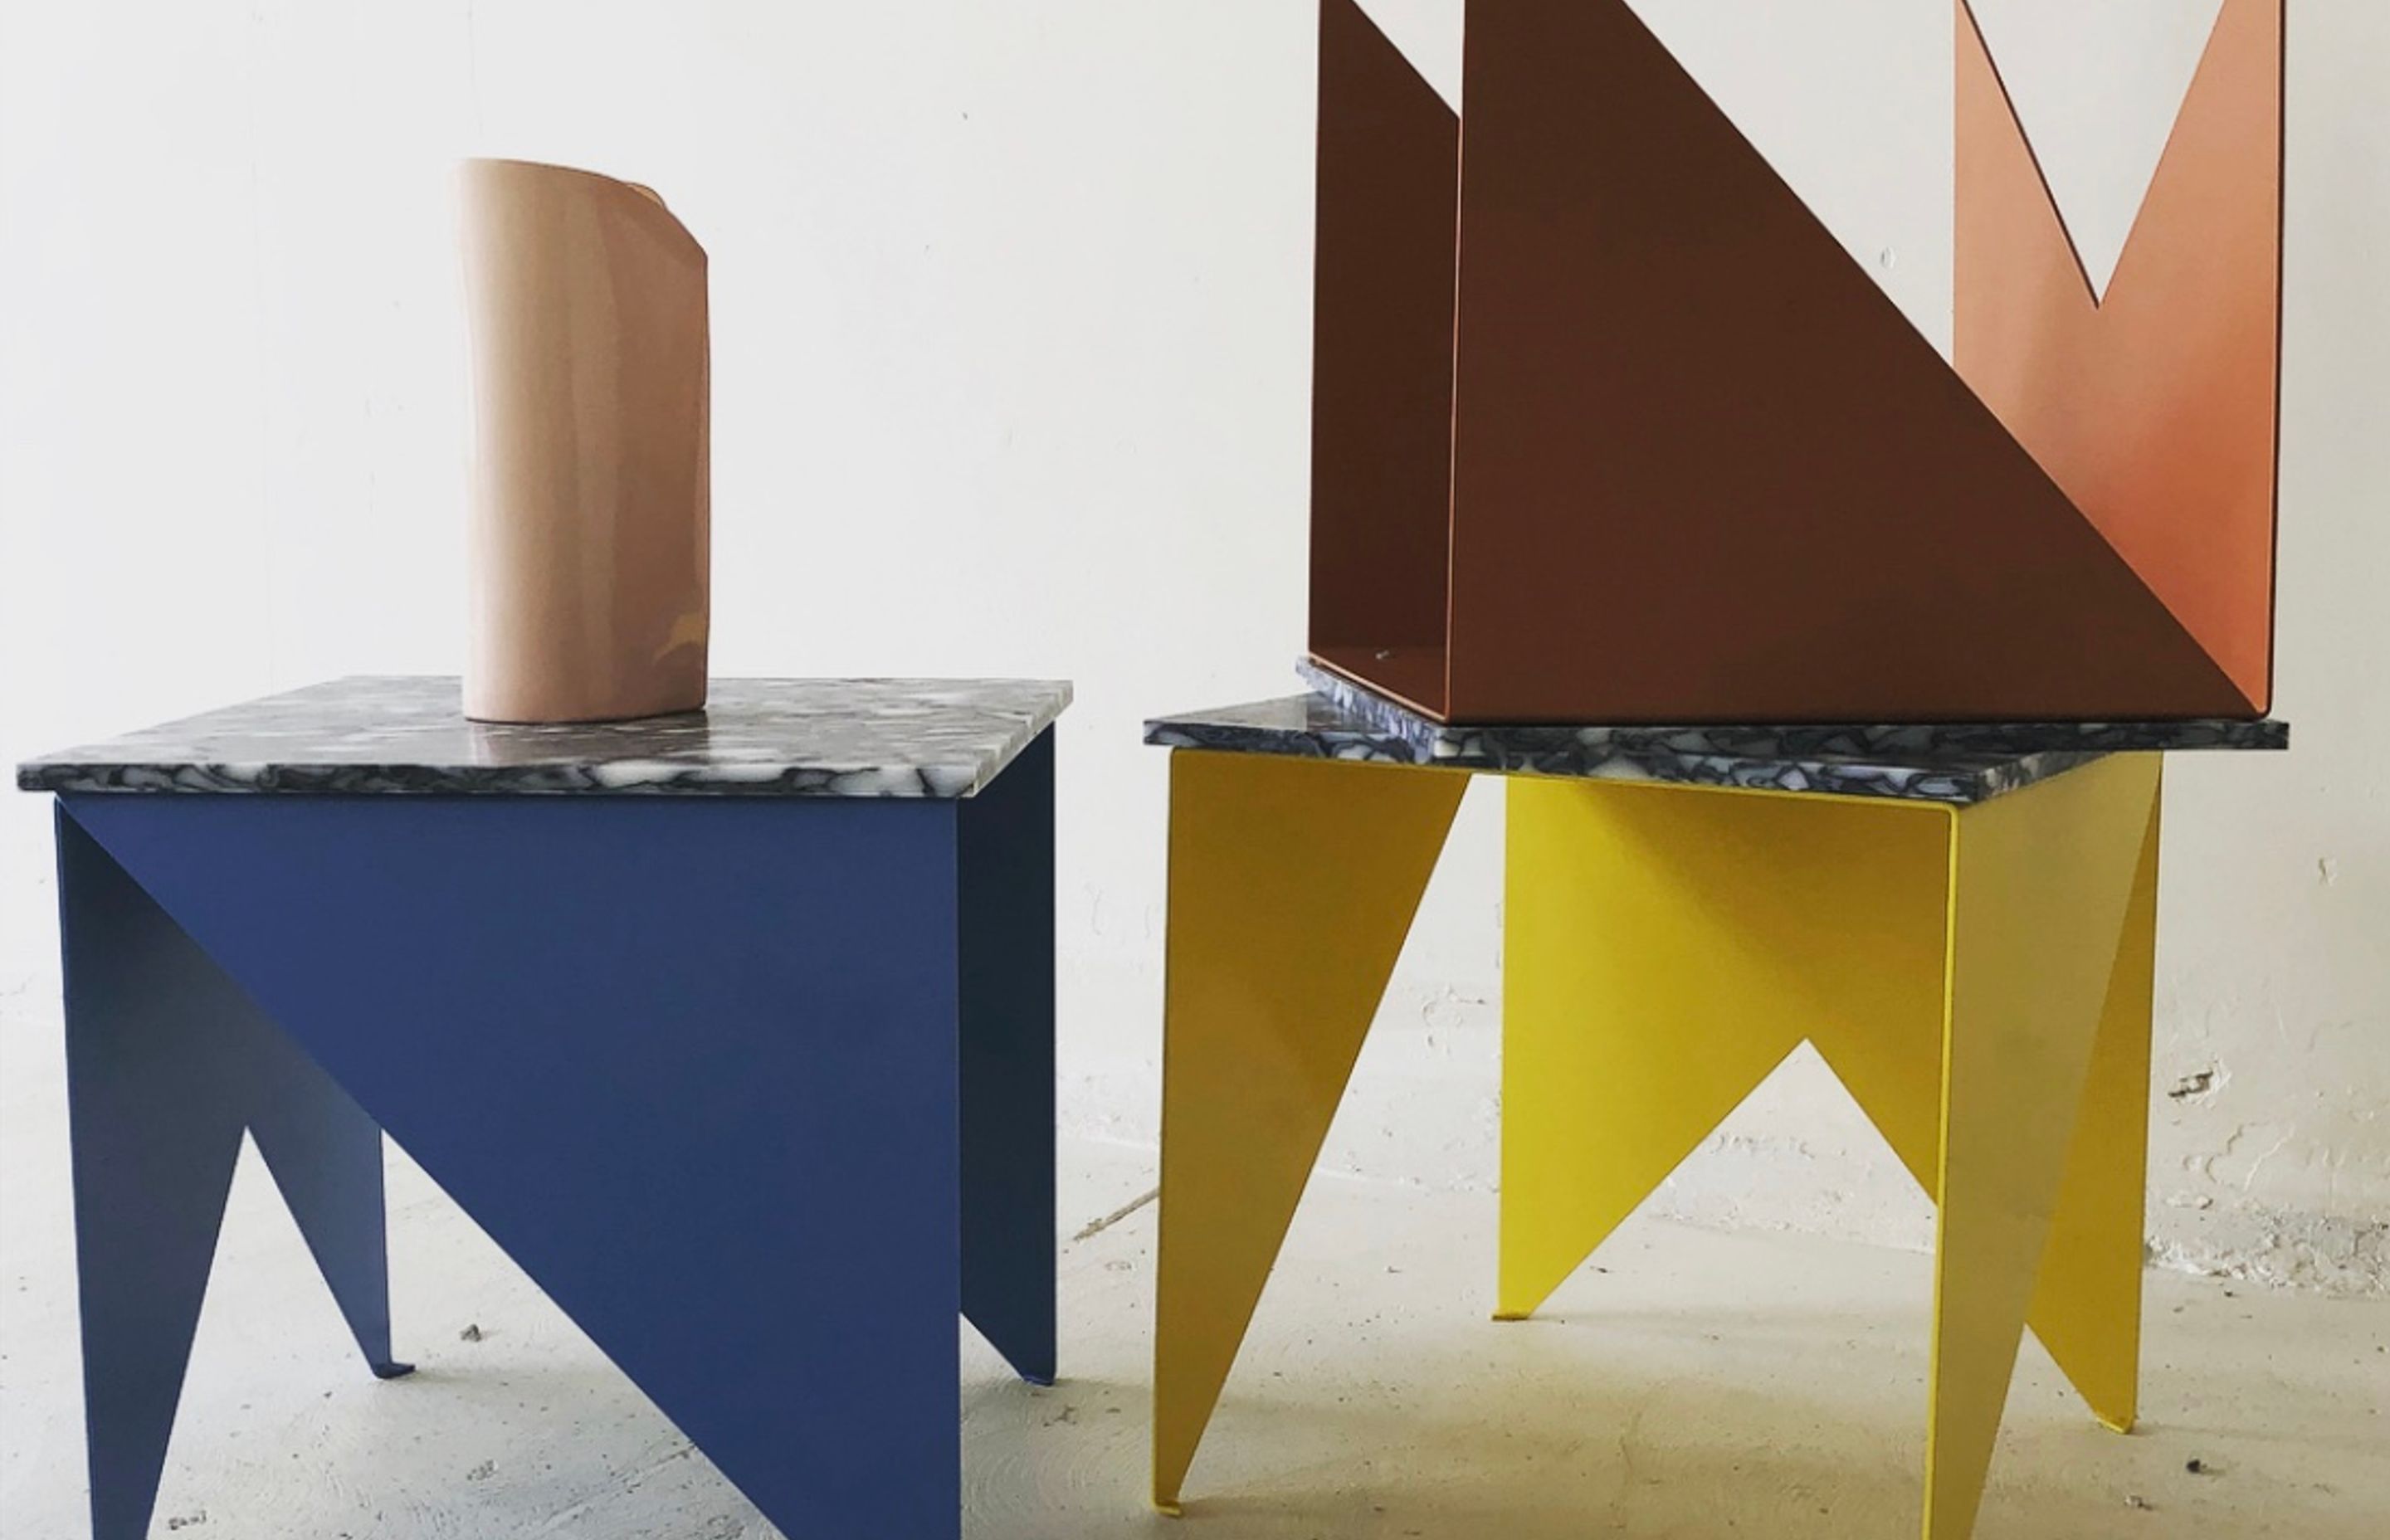 Side tables designed by Natalie Parke – "I keep veering into furniture design then coming back when it gets too full on. It is one of my many side hustles."